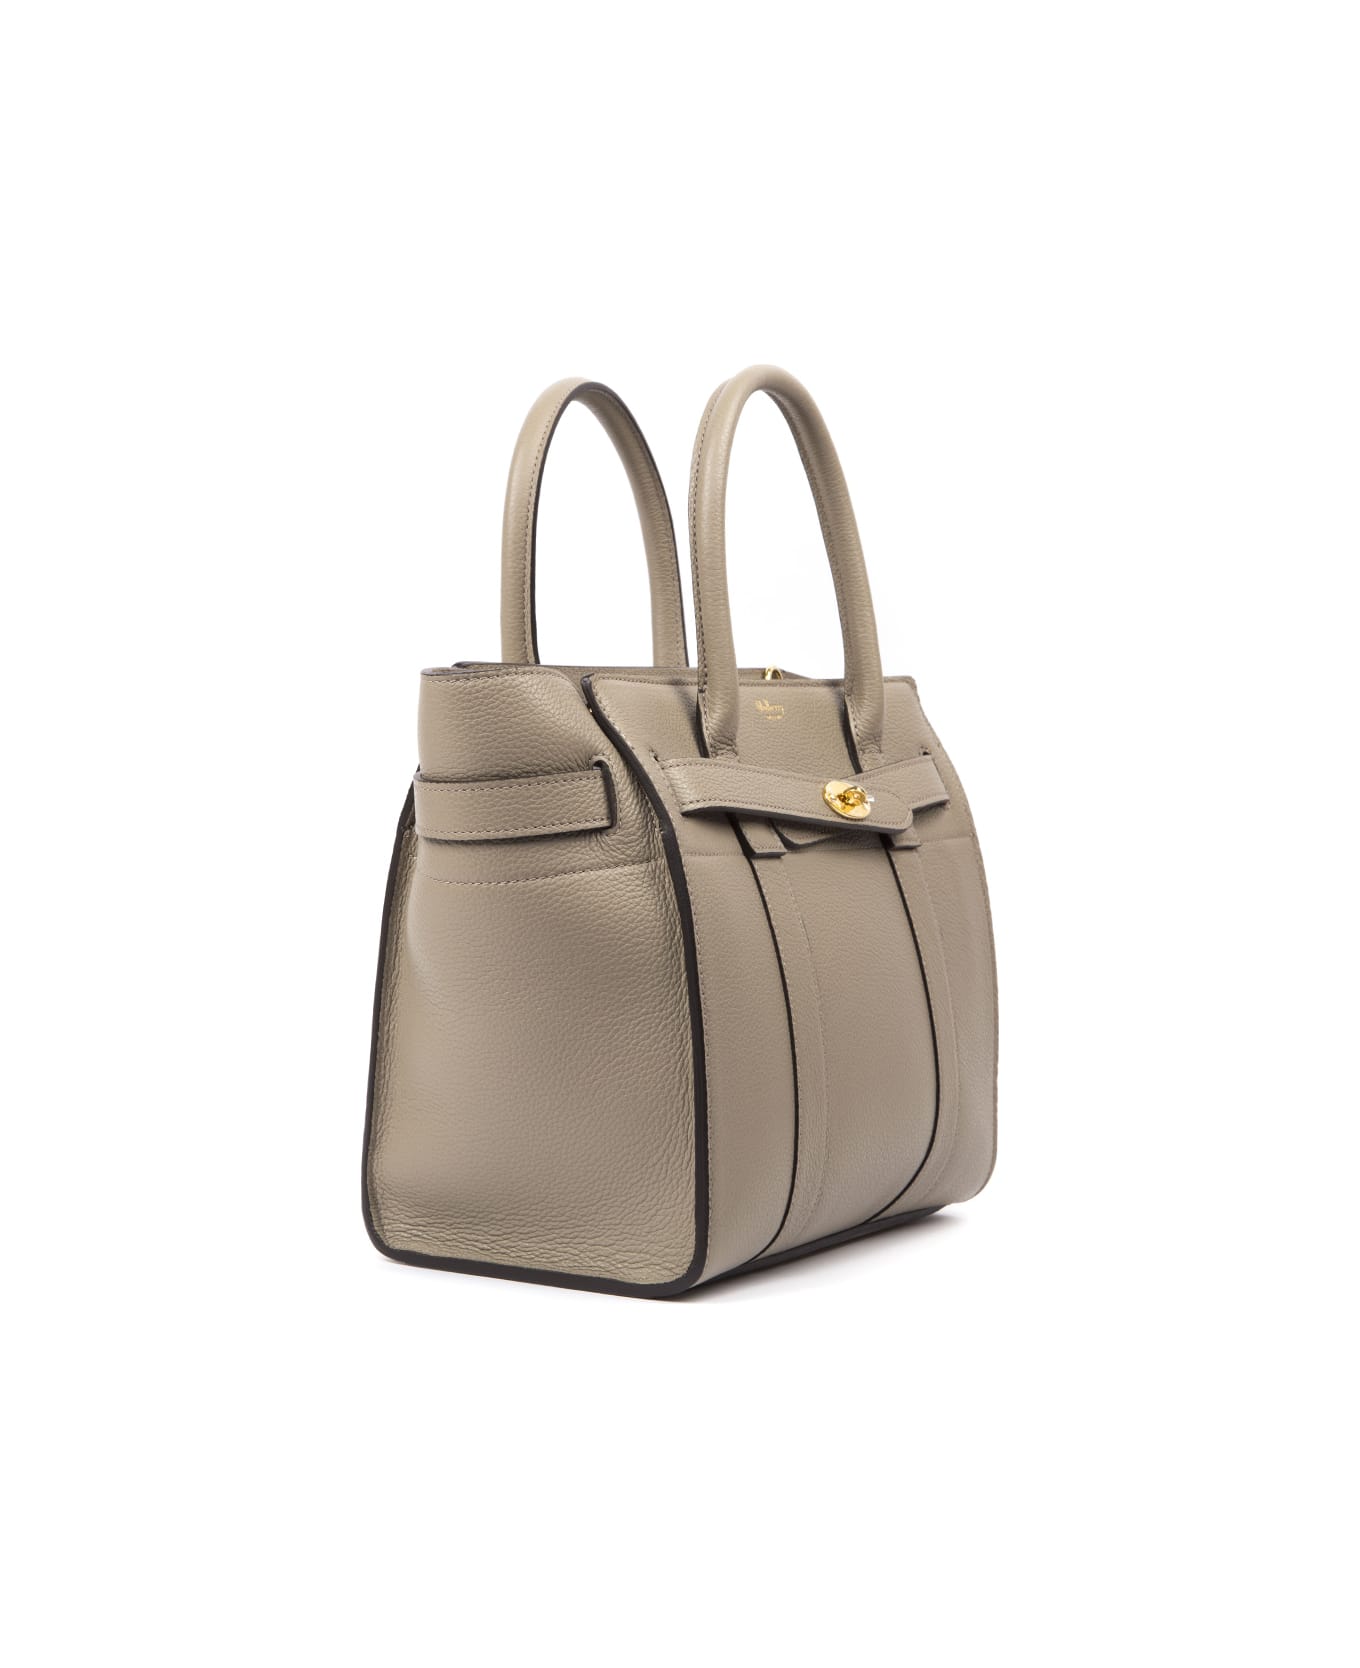 Mulberry Bayswater Solid Grey Leather Tote | italist, ALWAYS LIKE A SALE